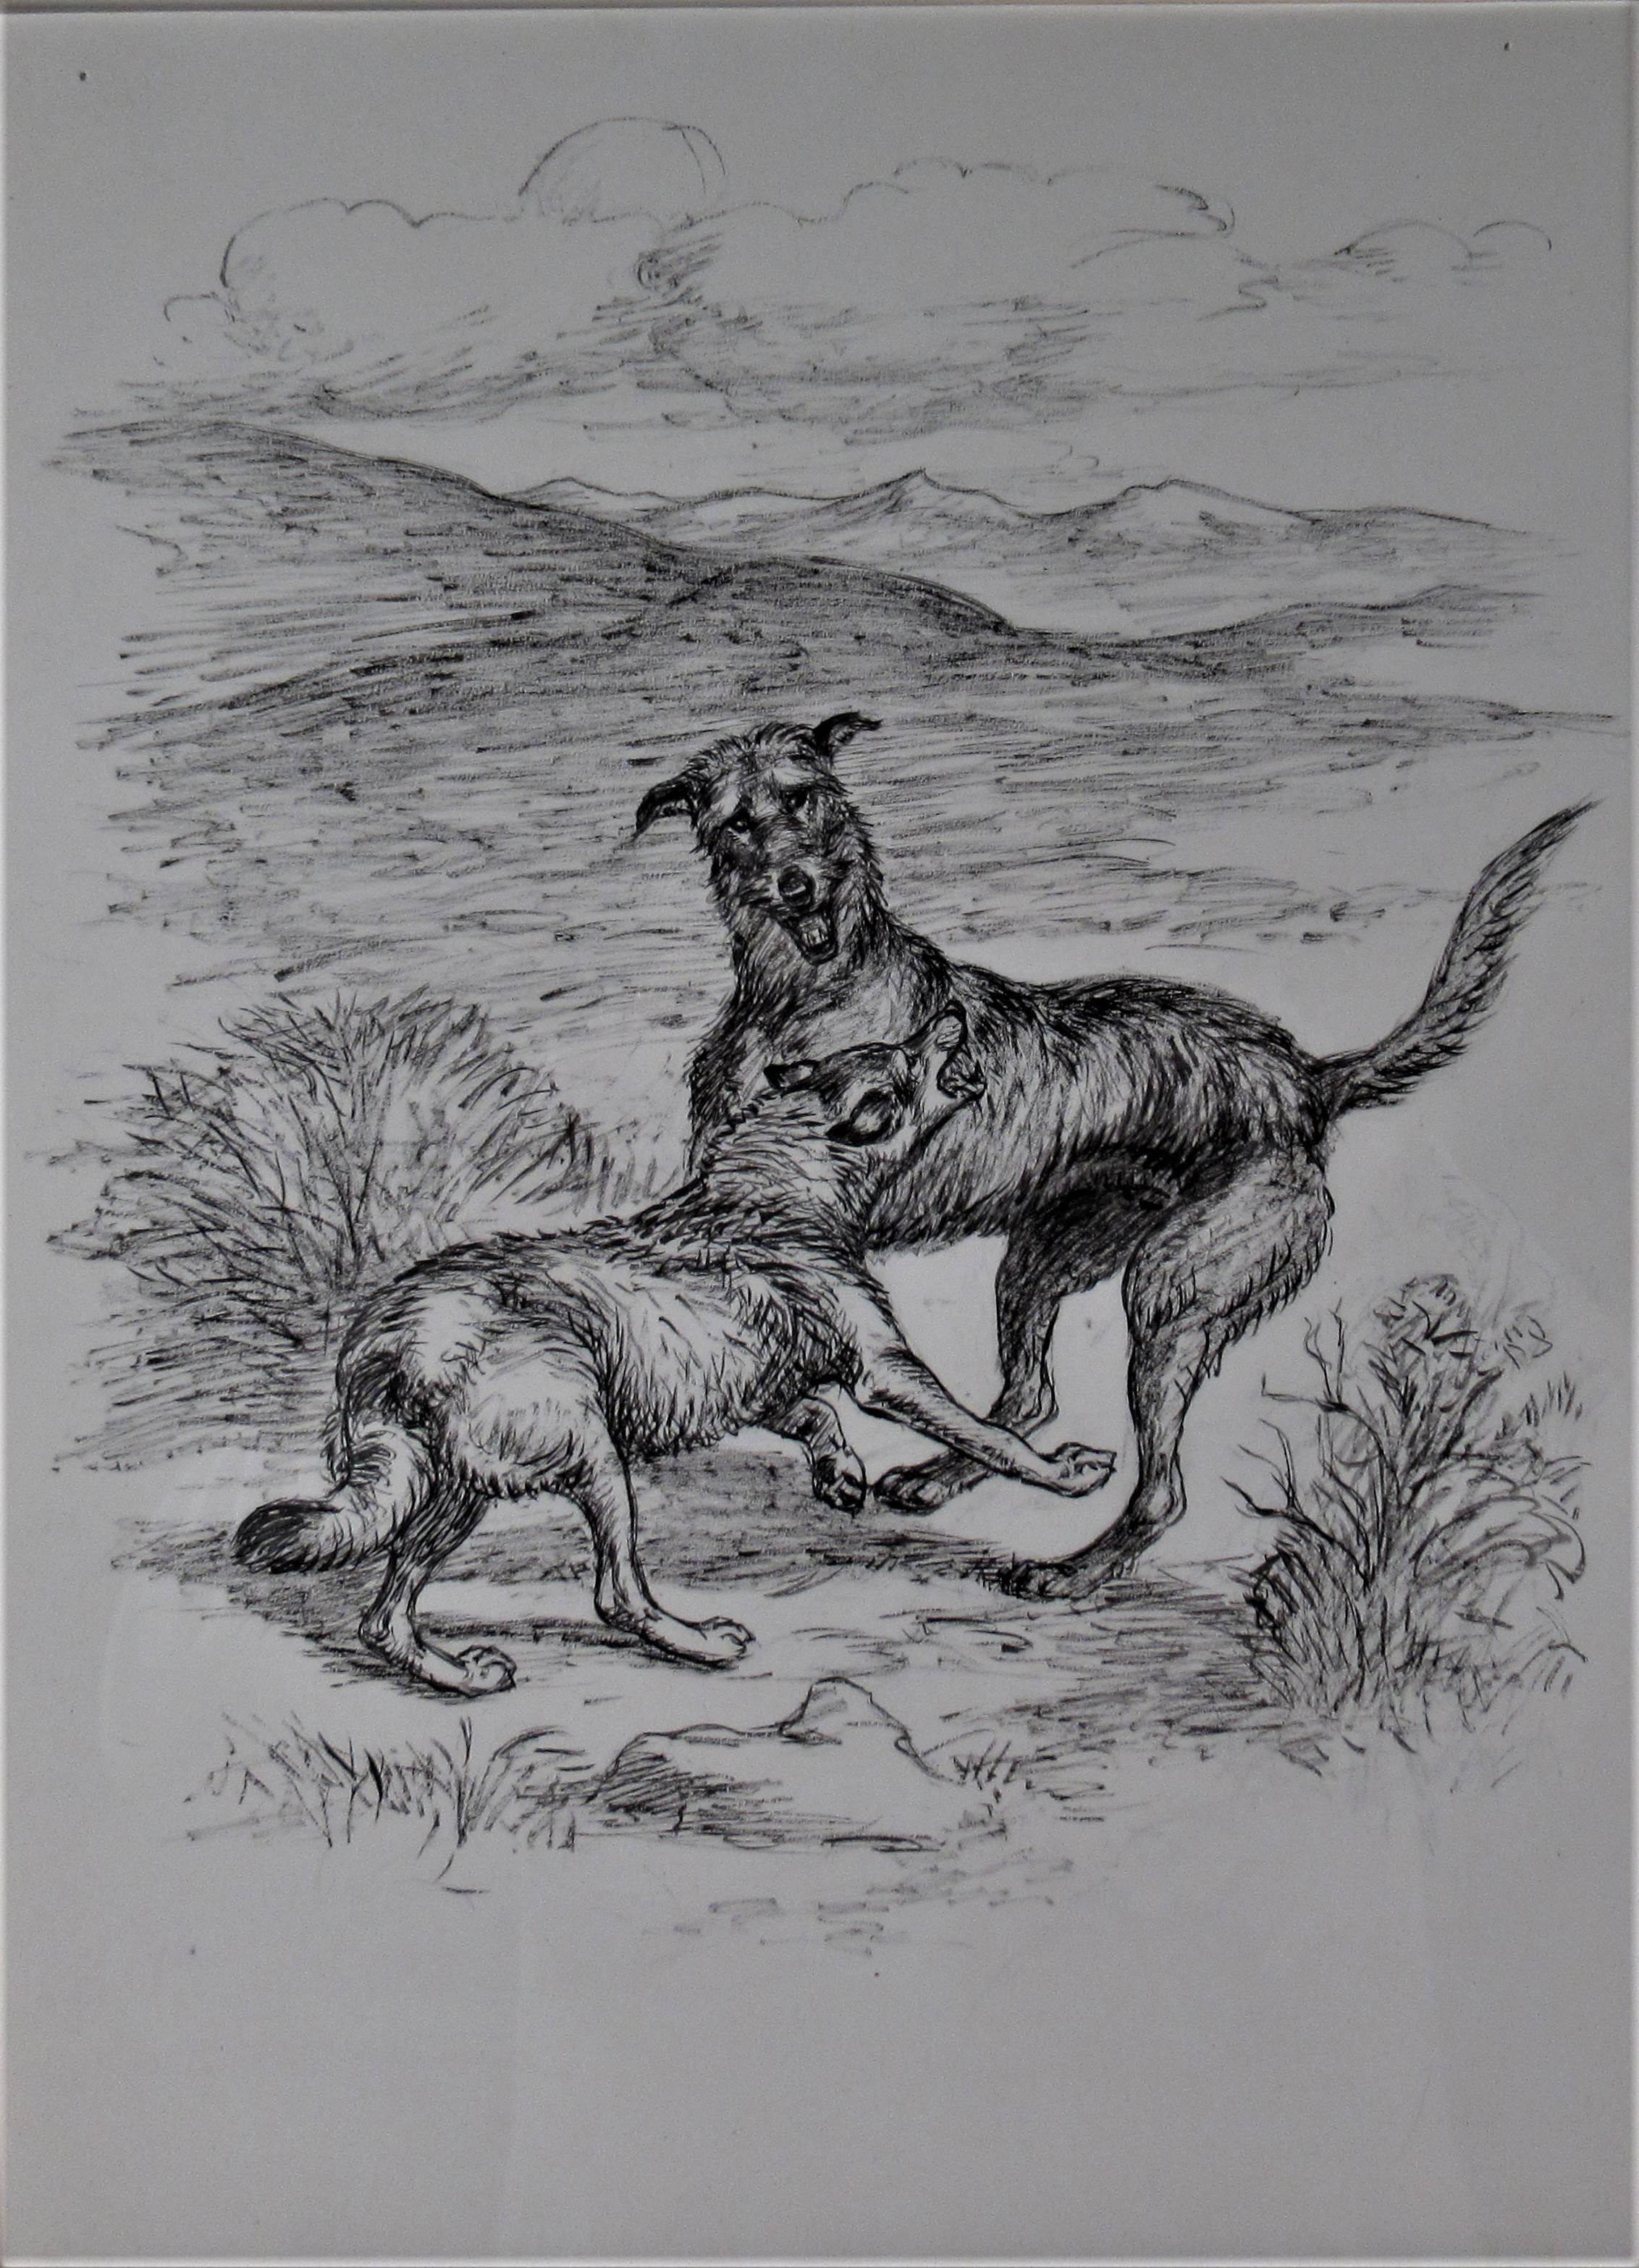 Dog and Wolf Fighting - Art by Margaret Sweet Johnson